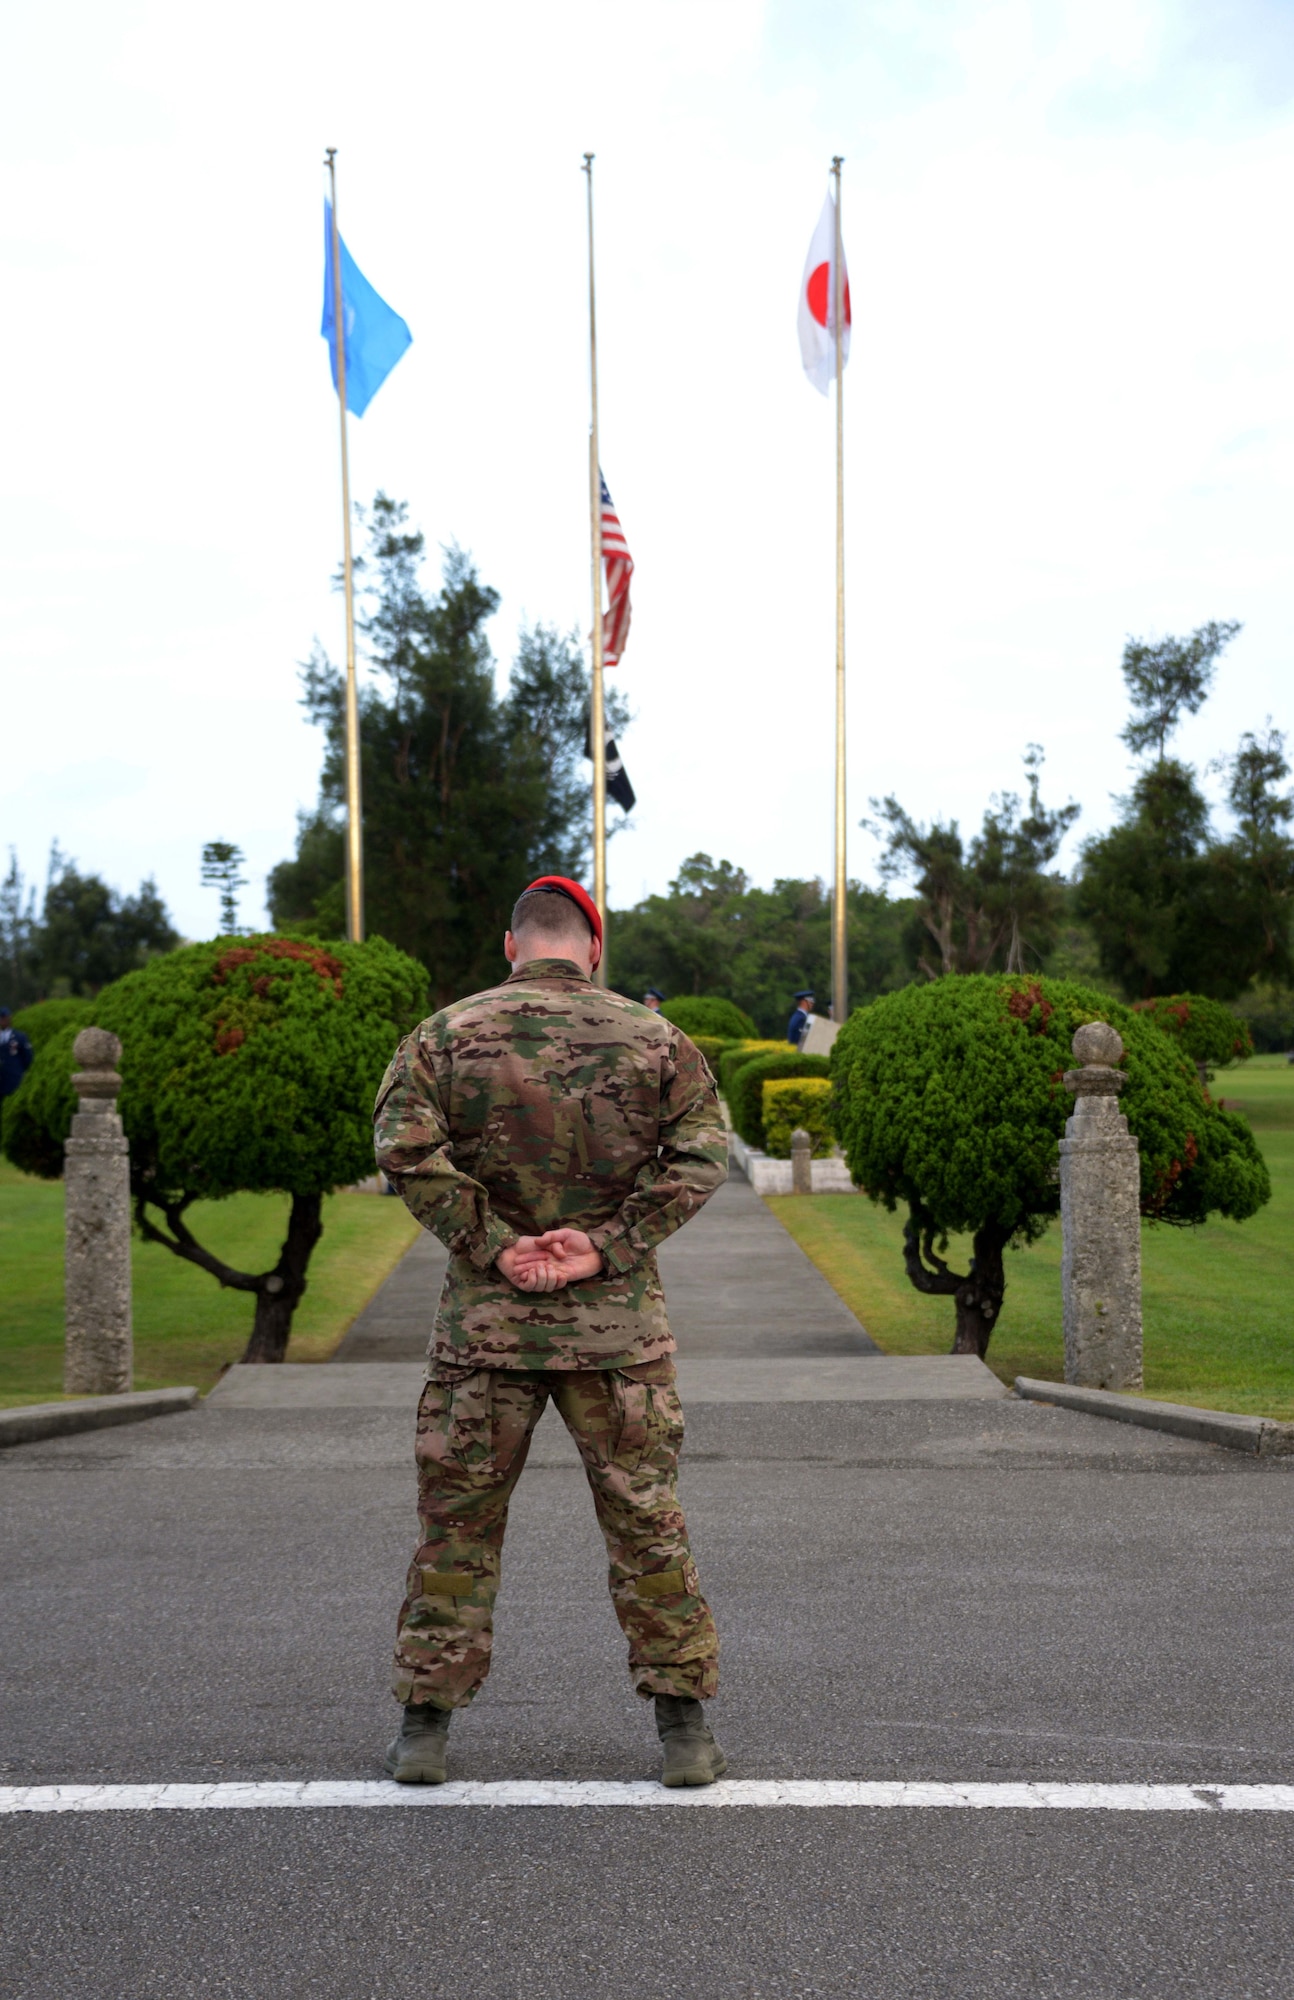 Maj. William White, 320th Special Tactics Squadron commander, bows his head during the innovocation at the POW/MIA flag ceremony held Sept. 20, 2013 at Kadena Air Base, Japan.  The flag ceremony signified the end of the 24-hour vigil run held to honor more than 70,000 POW and MIA personnel.  (U.S. Air Force photo by Tech. Sgt. Kristine Dreyer)